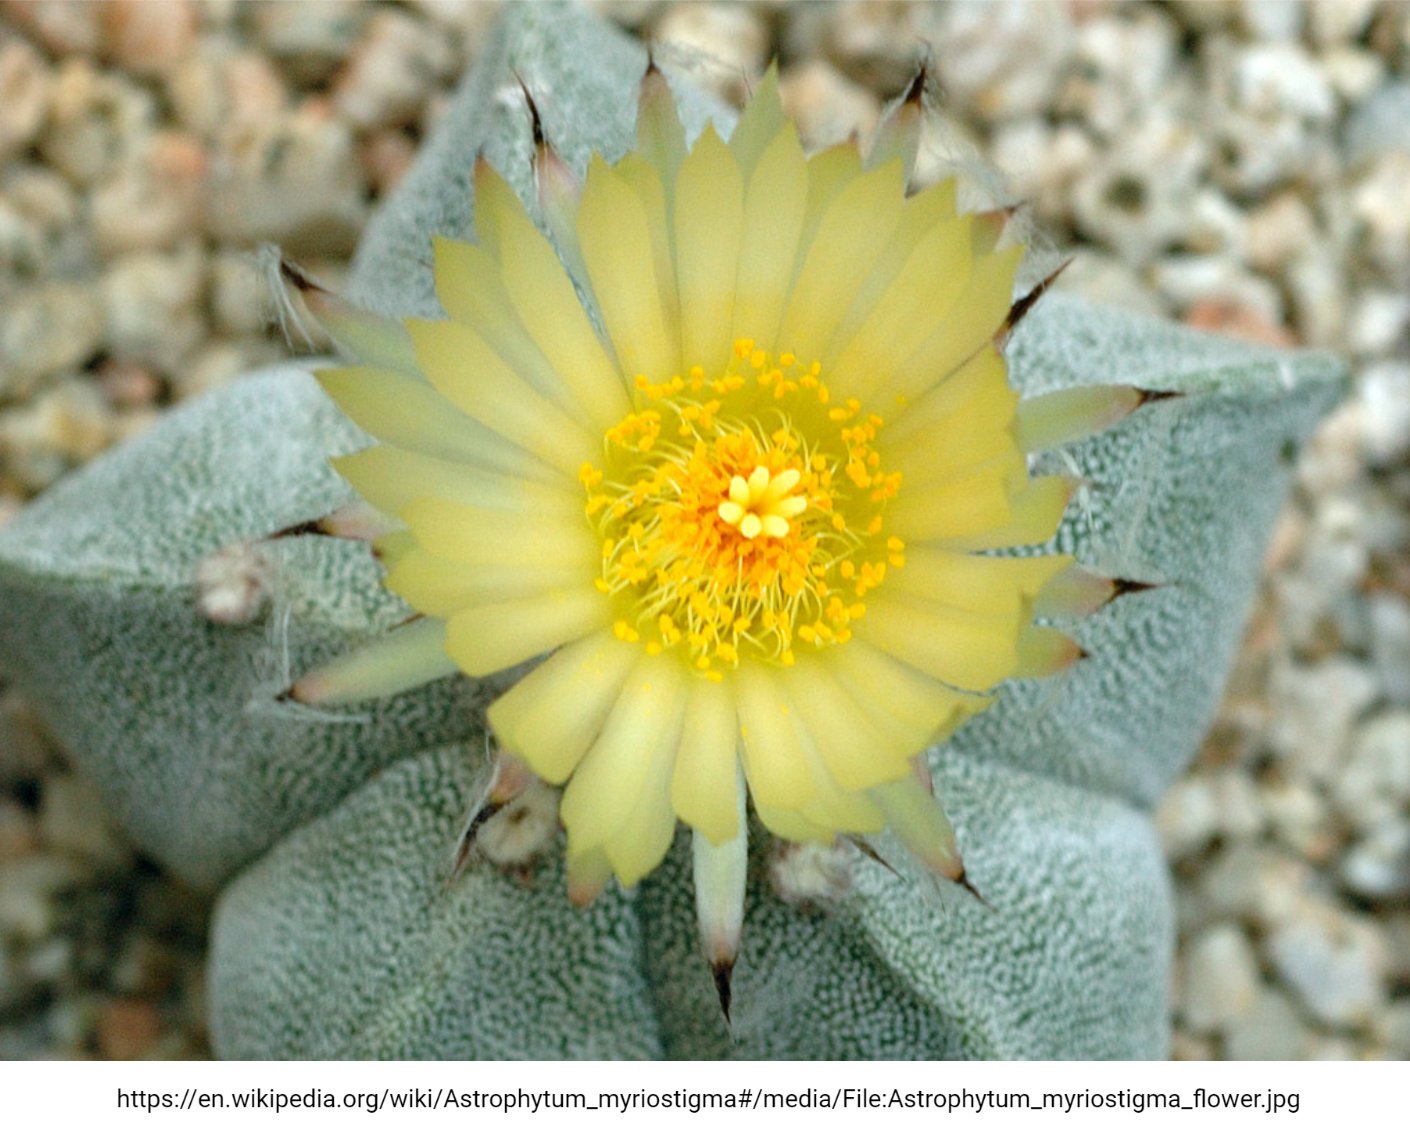 Artificial producation of anthocyanins in the betalain-pigmented cactus (Tweet #29)